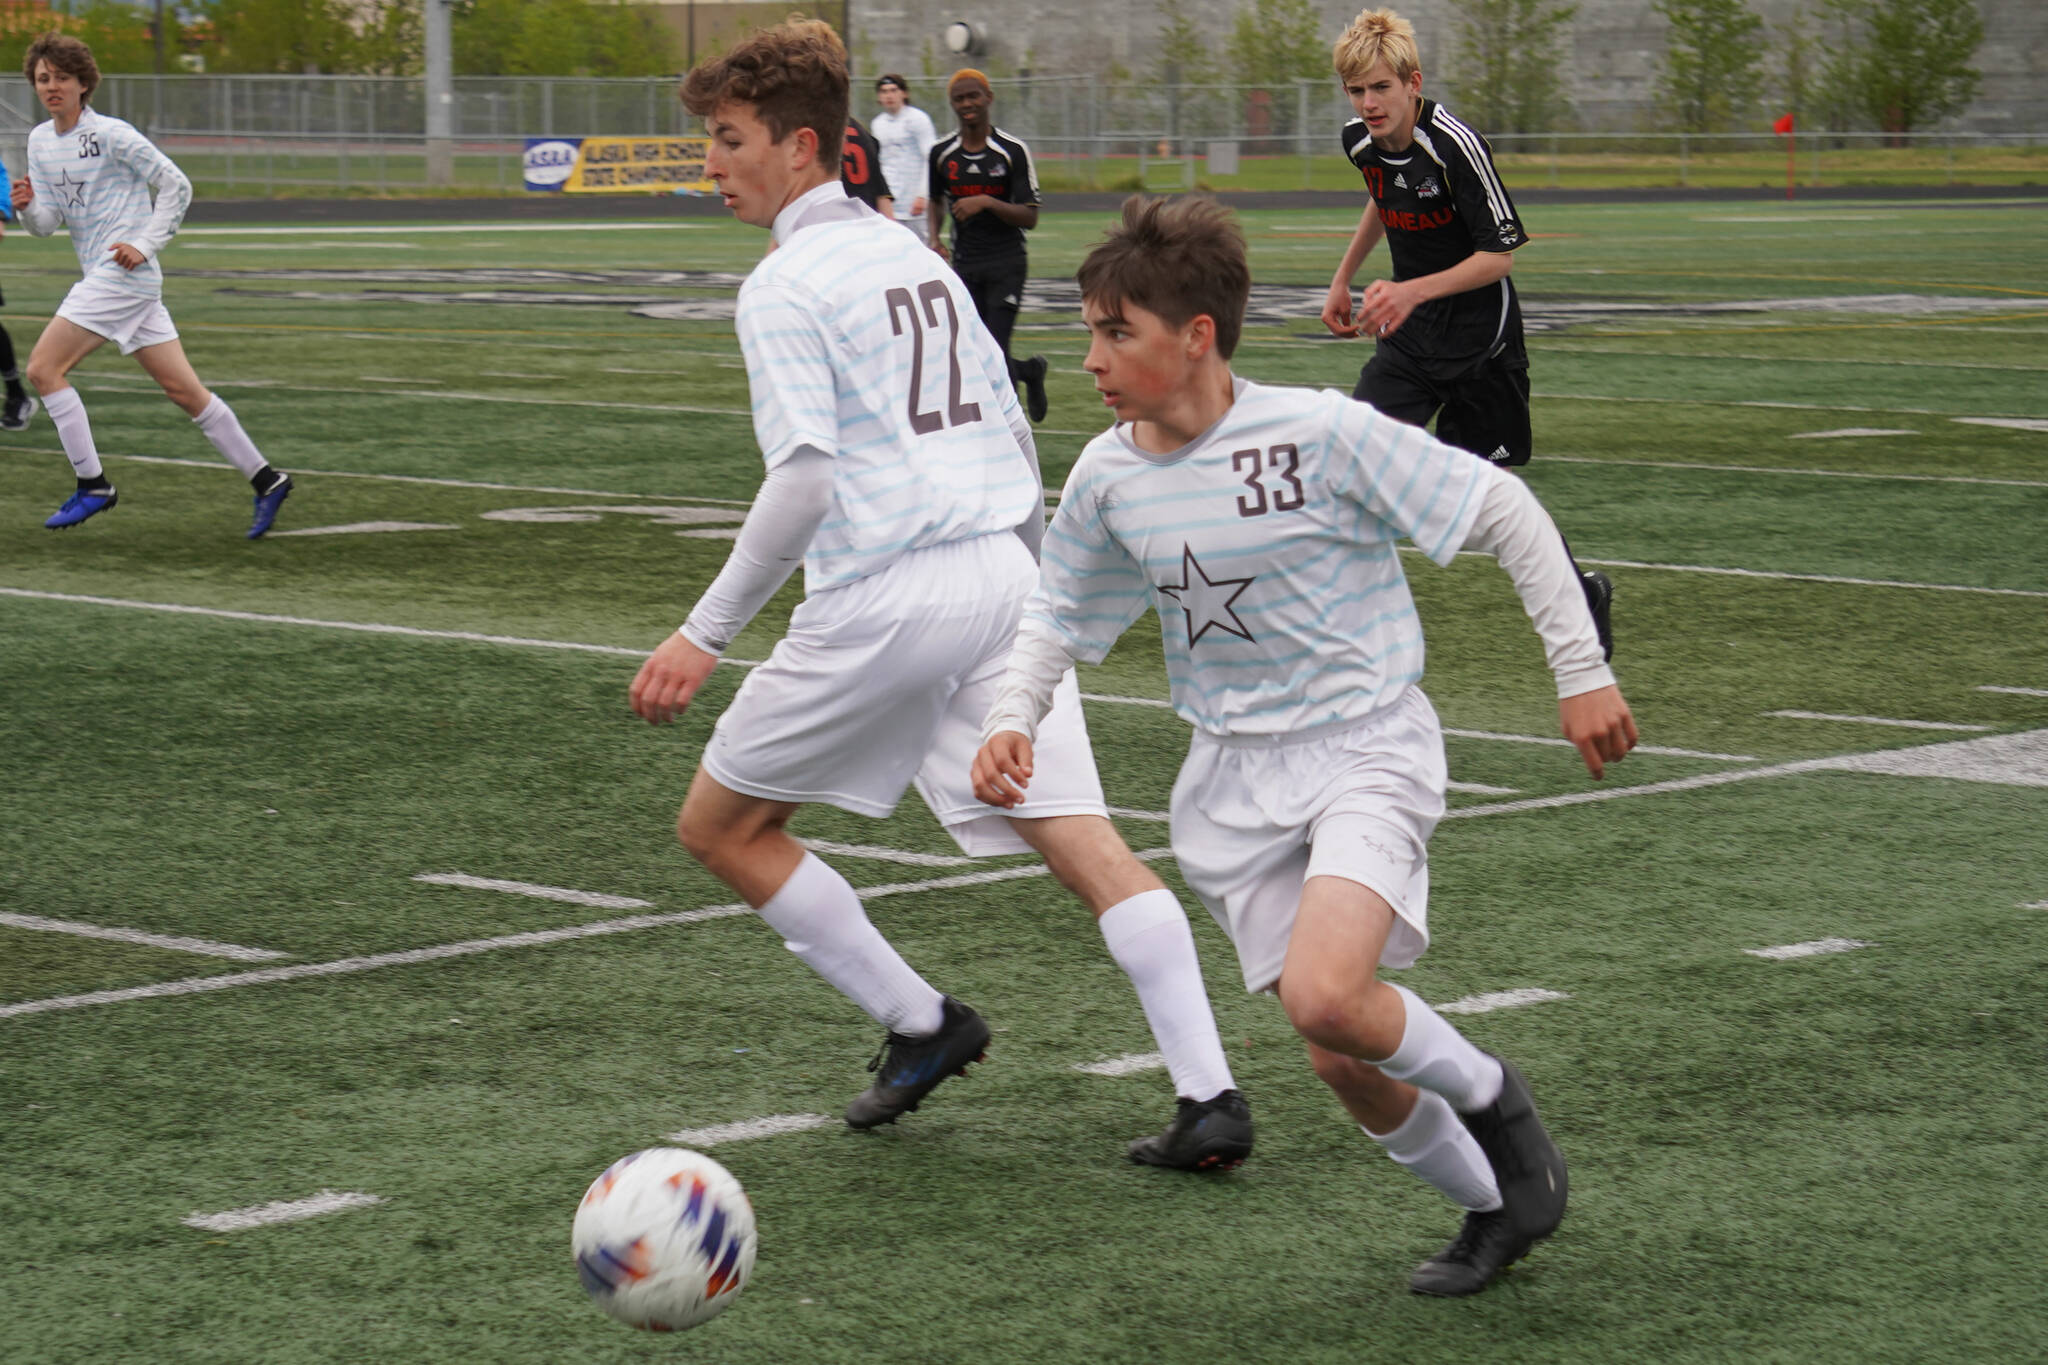 Soldotna’s Lane Hillyer moves with the ball, defended by teammate Zachary Buckbee and pursued by Juneau-Douglas’ Owen Rumsey during the Division II Soccer State Championship on Saturday, May 27, 2023, at West Anchorage High School in Anchorage, Alaska. (Jake Dye/Peninsula Clarion)